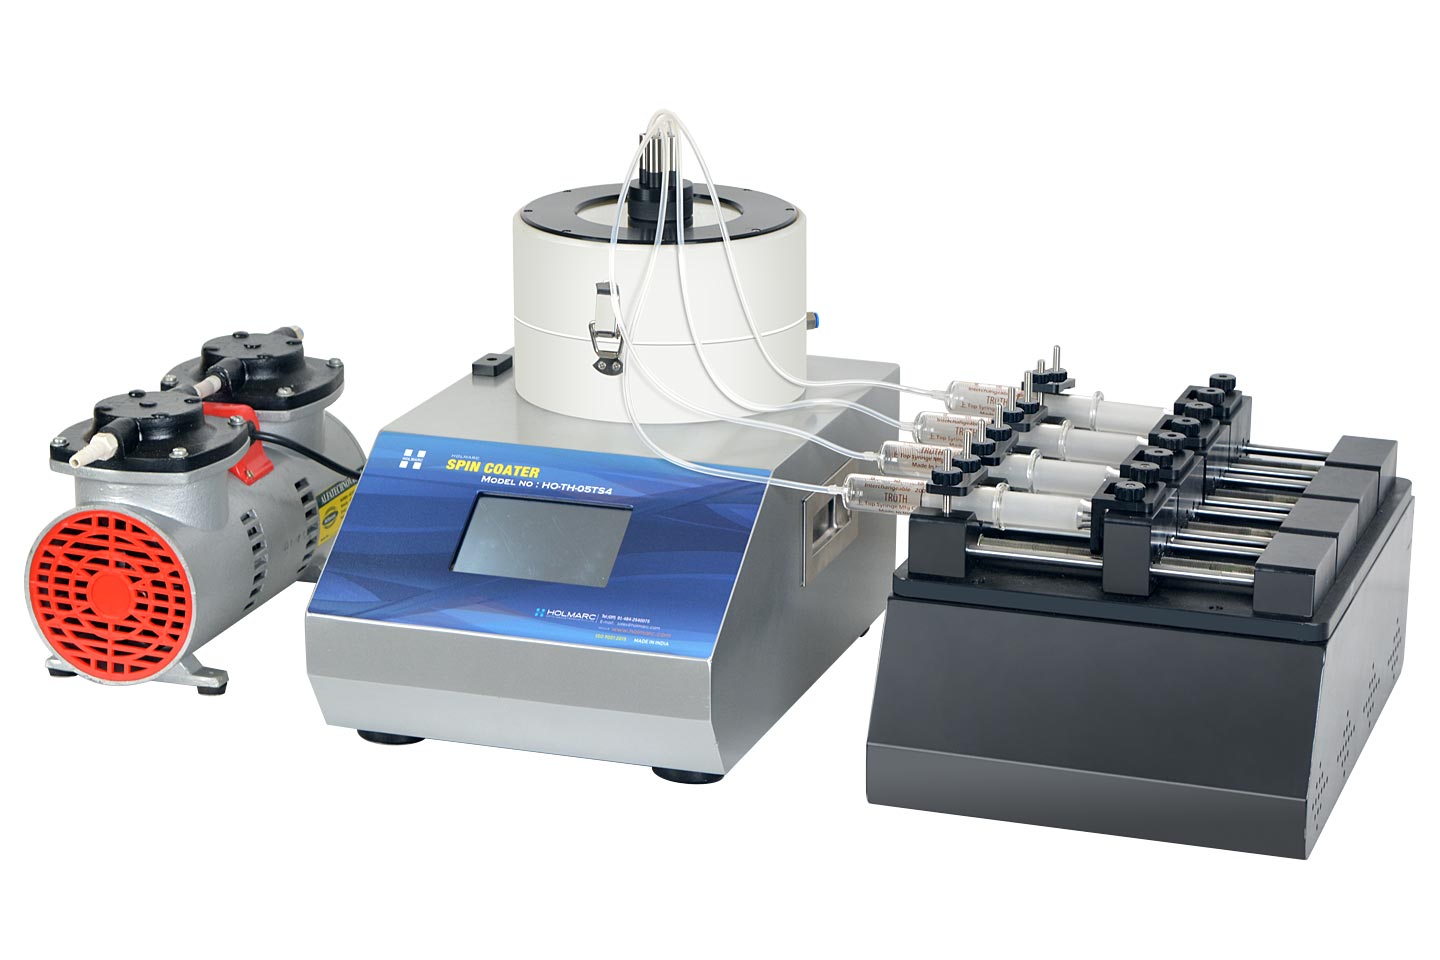 Spin Coating Unit with Integrated Integrated 4 Channel Syringe Pump